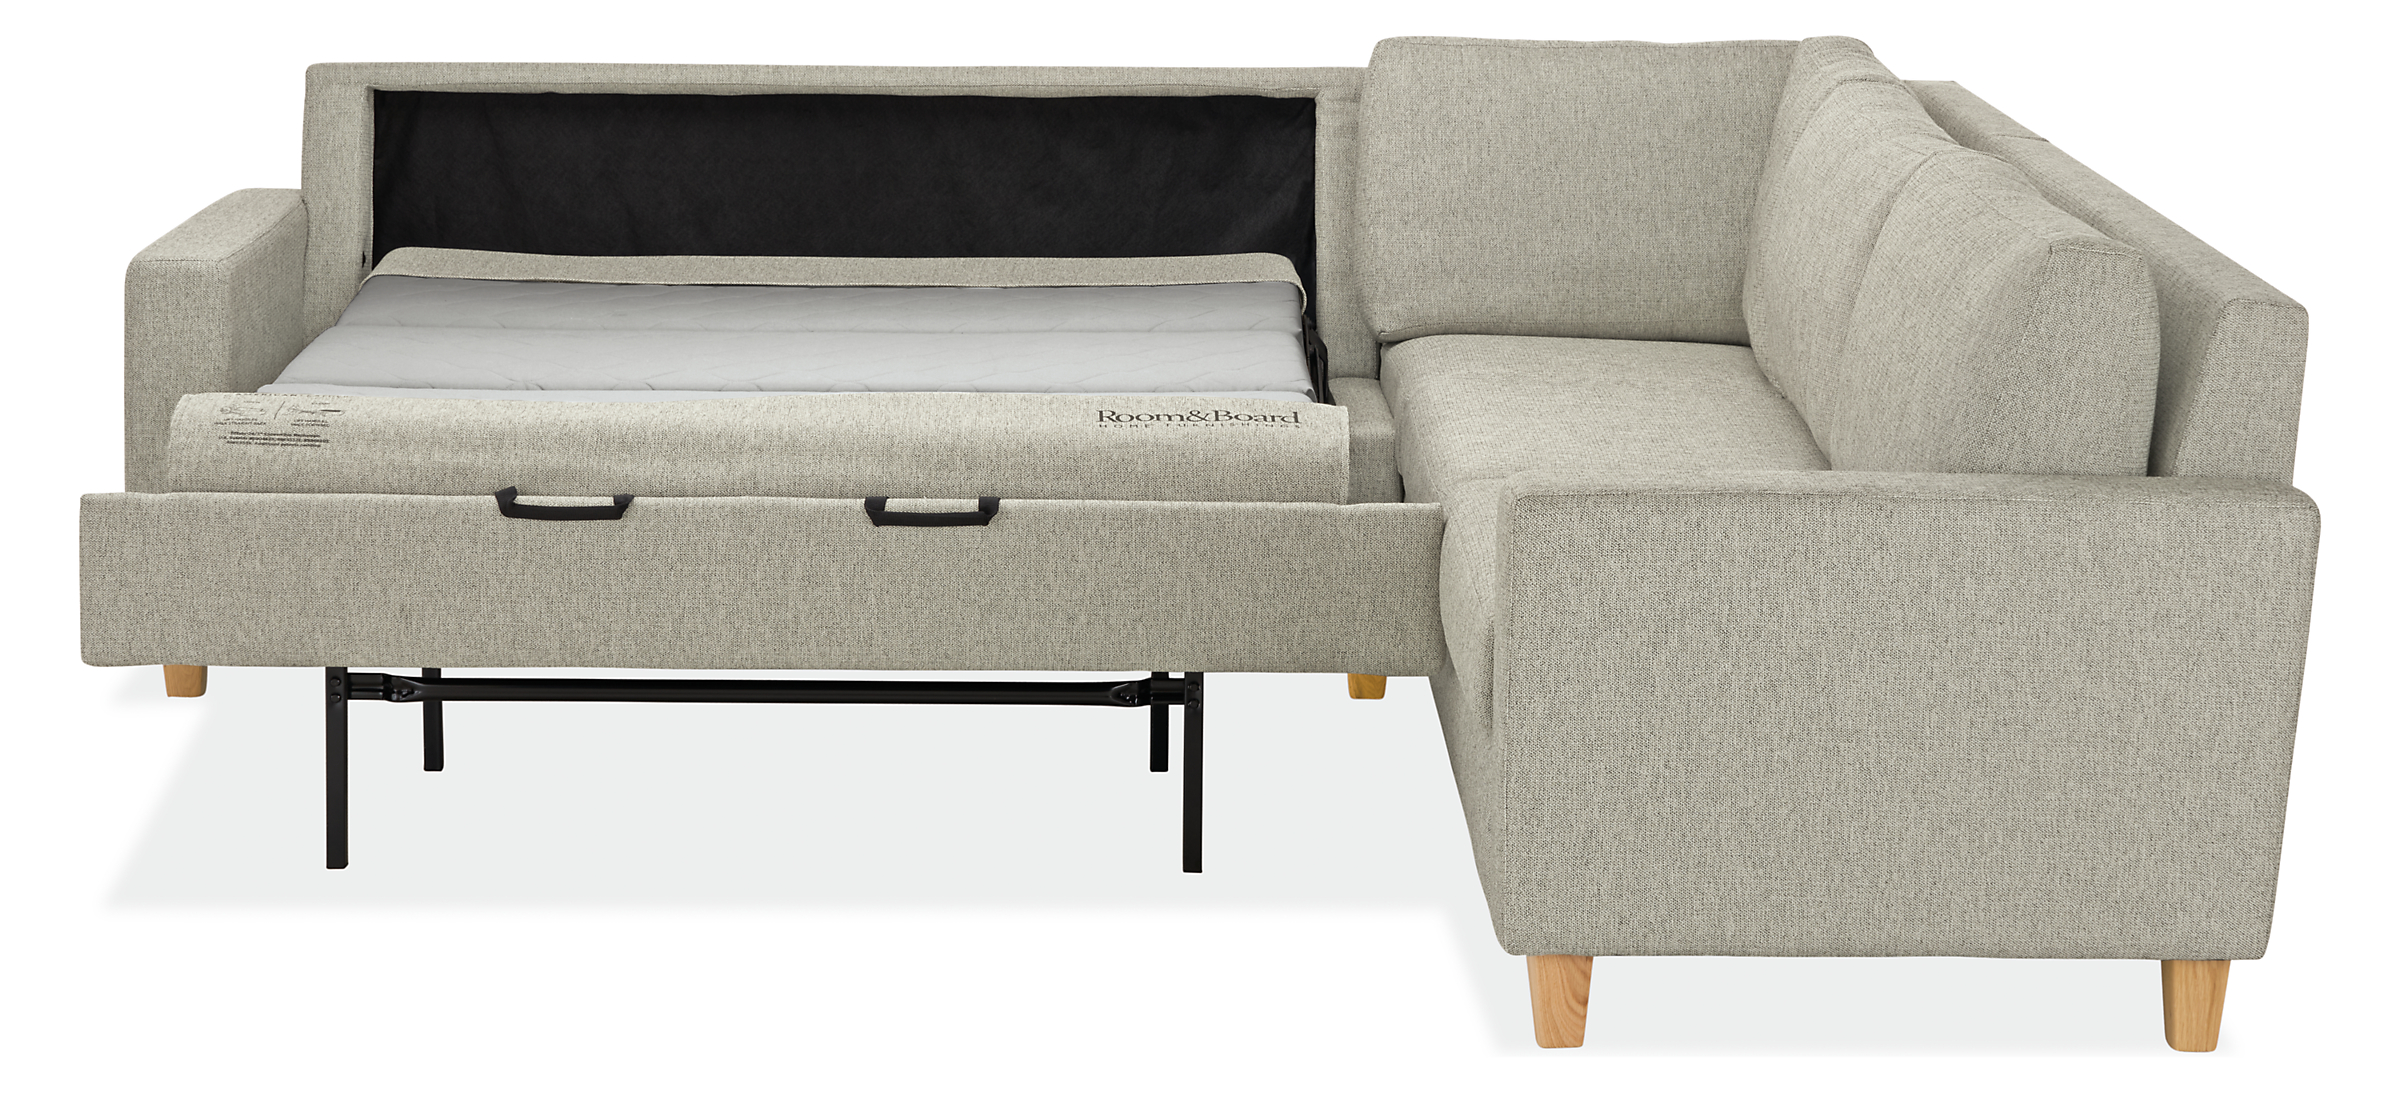 Front view of Berin sectional sleeper in full open position.